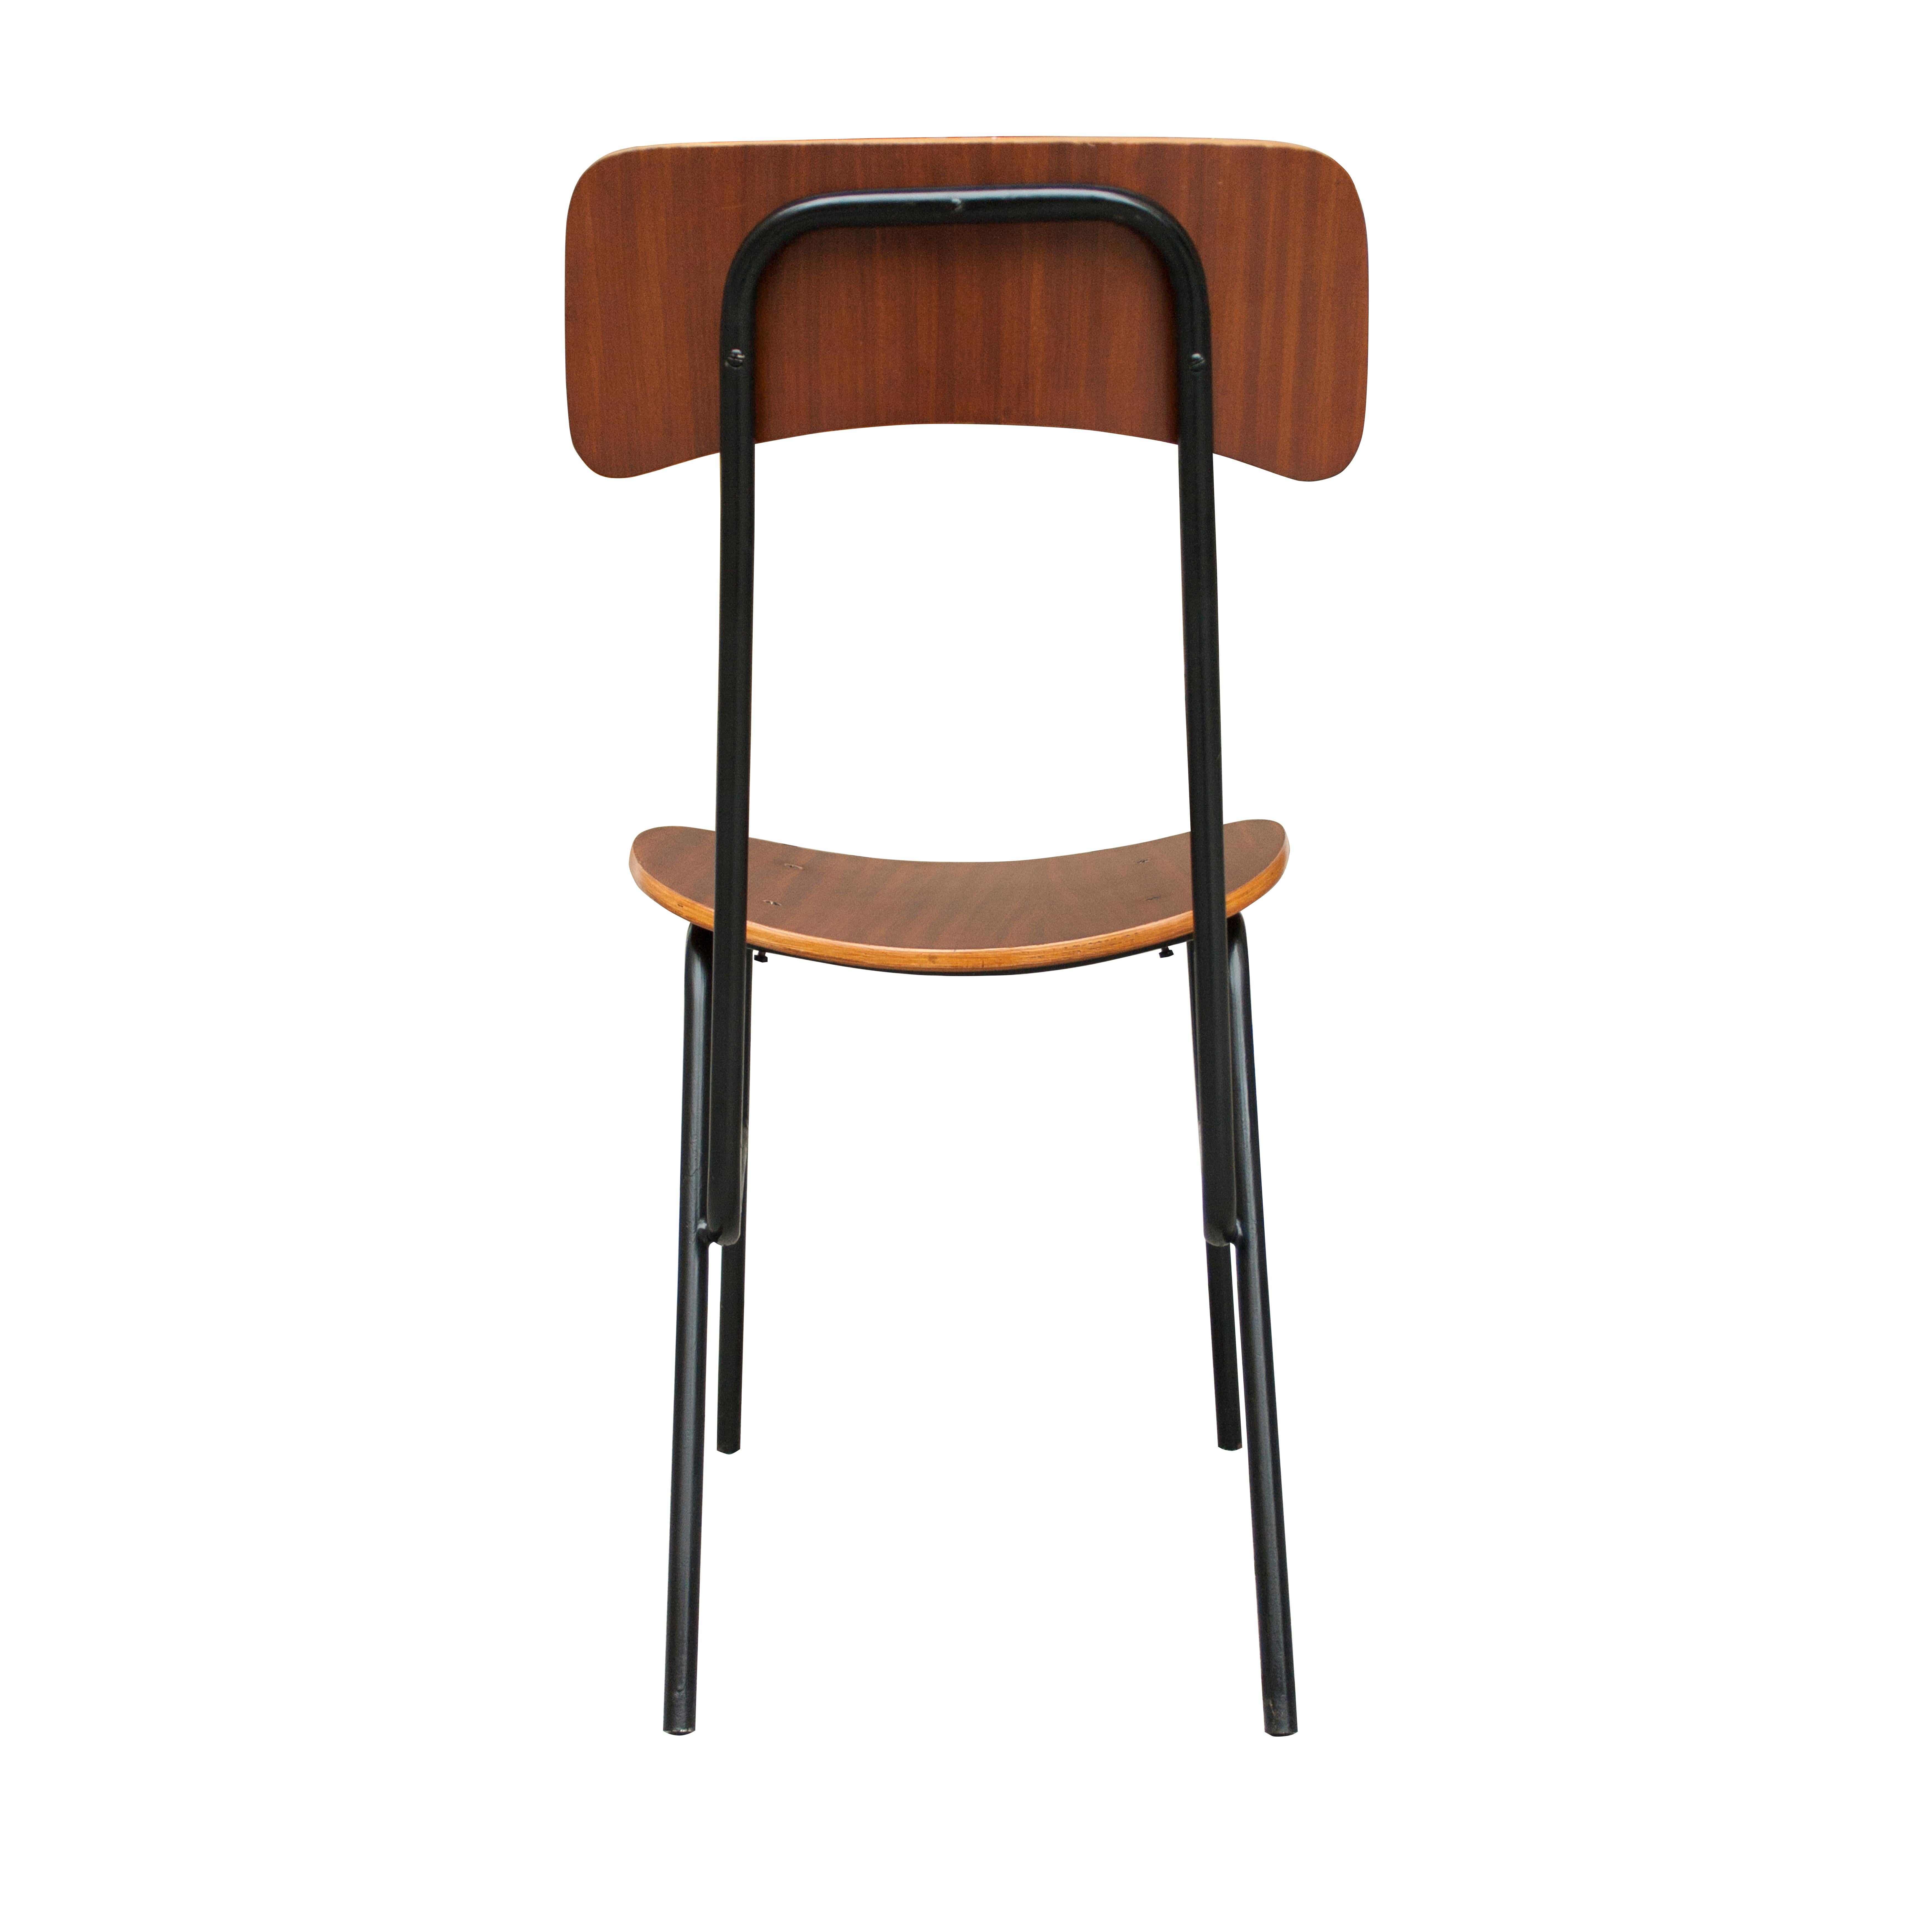 Mid-Century Modern Teak Wood Chair with Metalic Structure, Italy, 1950 In Good Condition For Sale In Madrid, ES